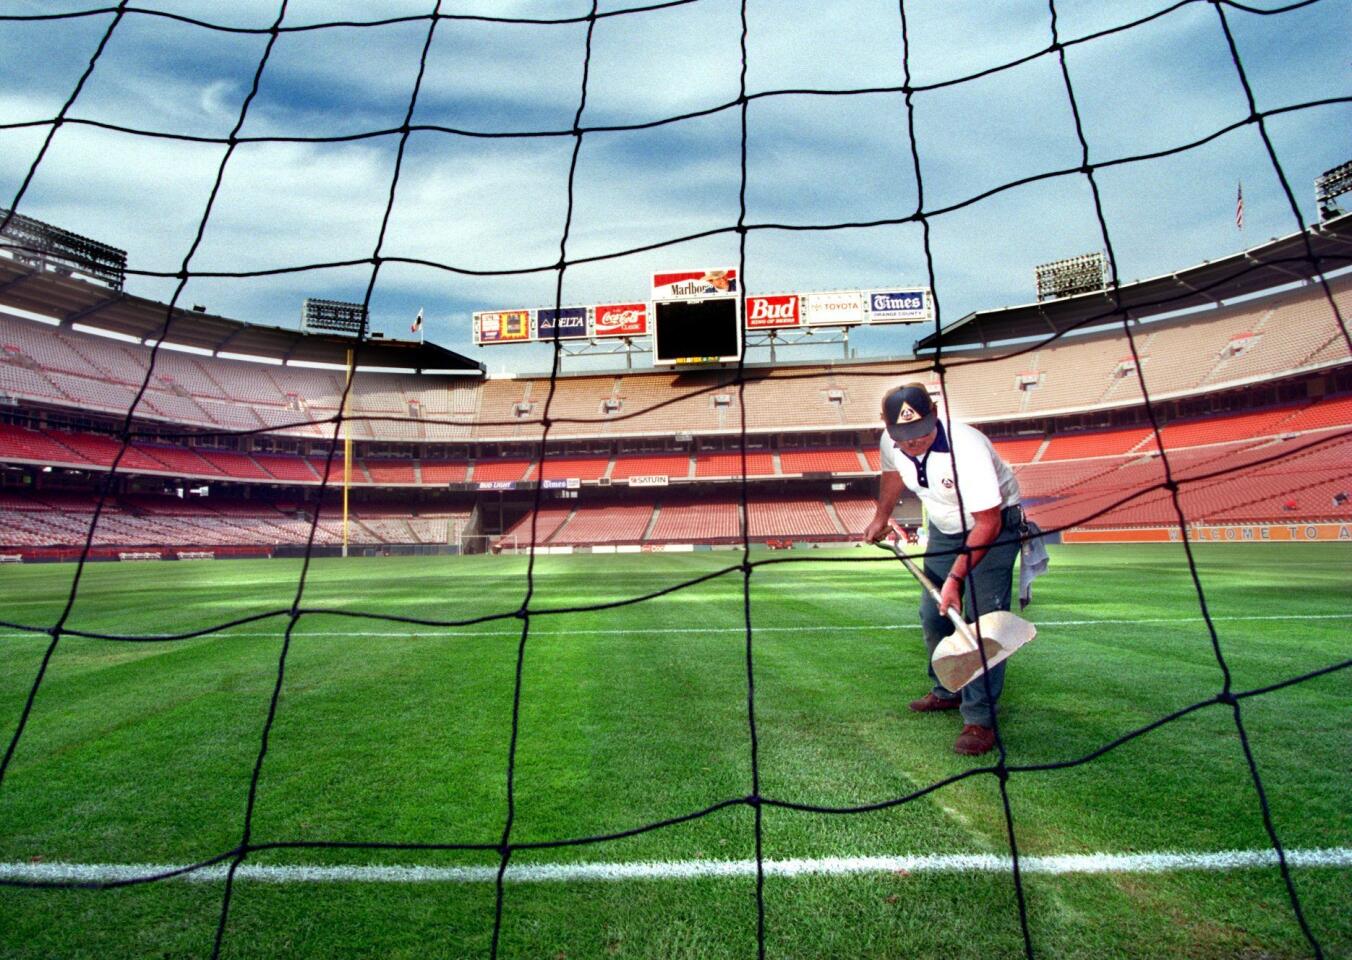 Anaheim Stadium groundskeeper Brian Nofziger groomed the new turf on the field while preparing for the Gold Cup Soccer games.